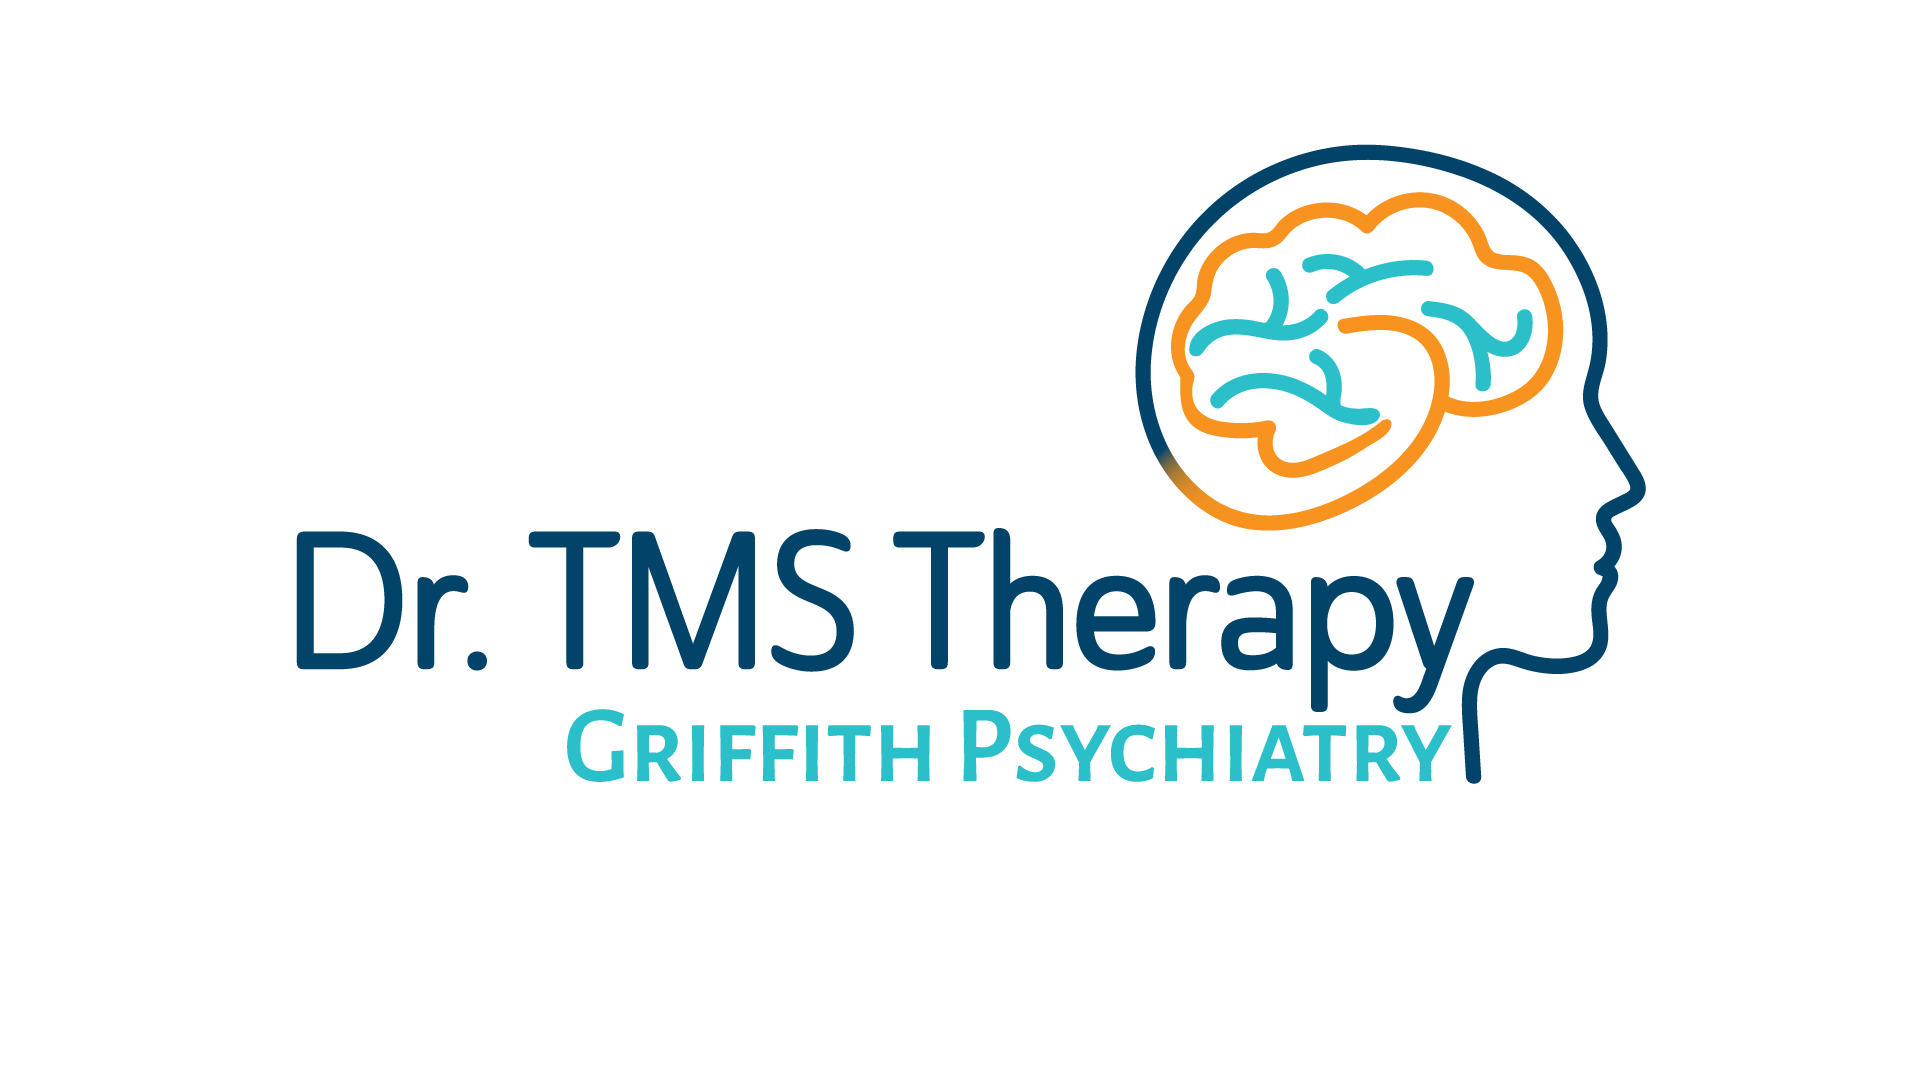 Dr. TMS Therapy Griffith Psychiatry logo